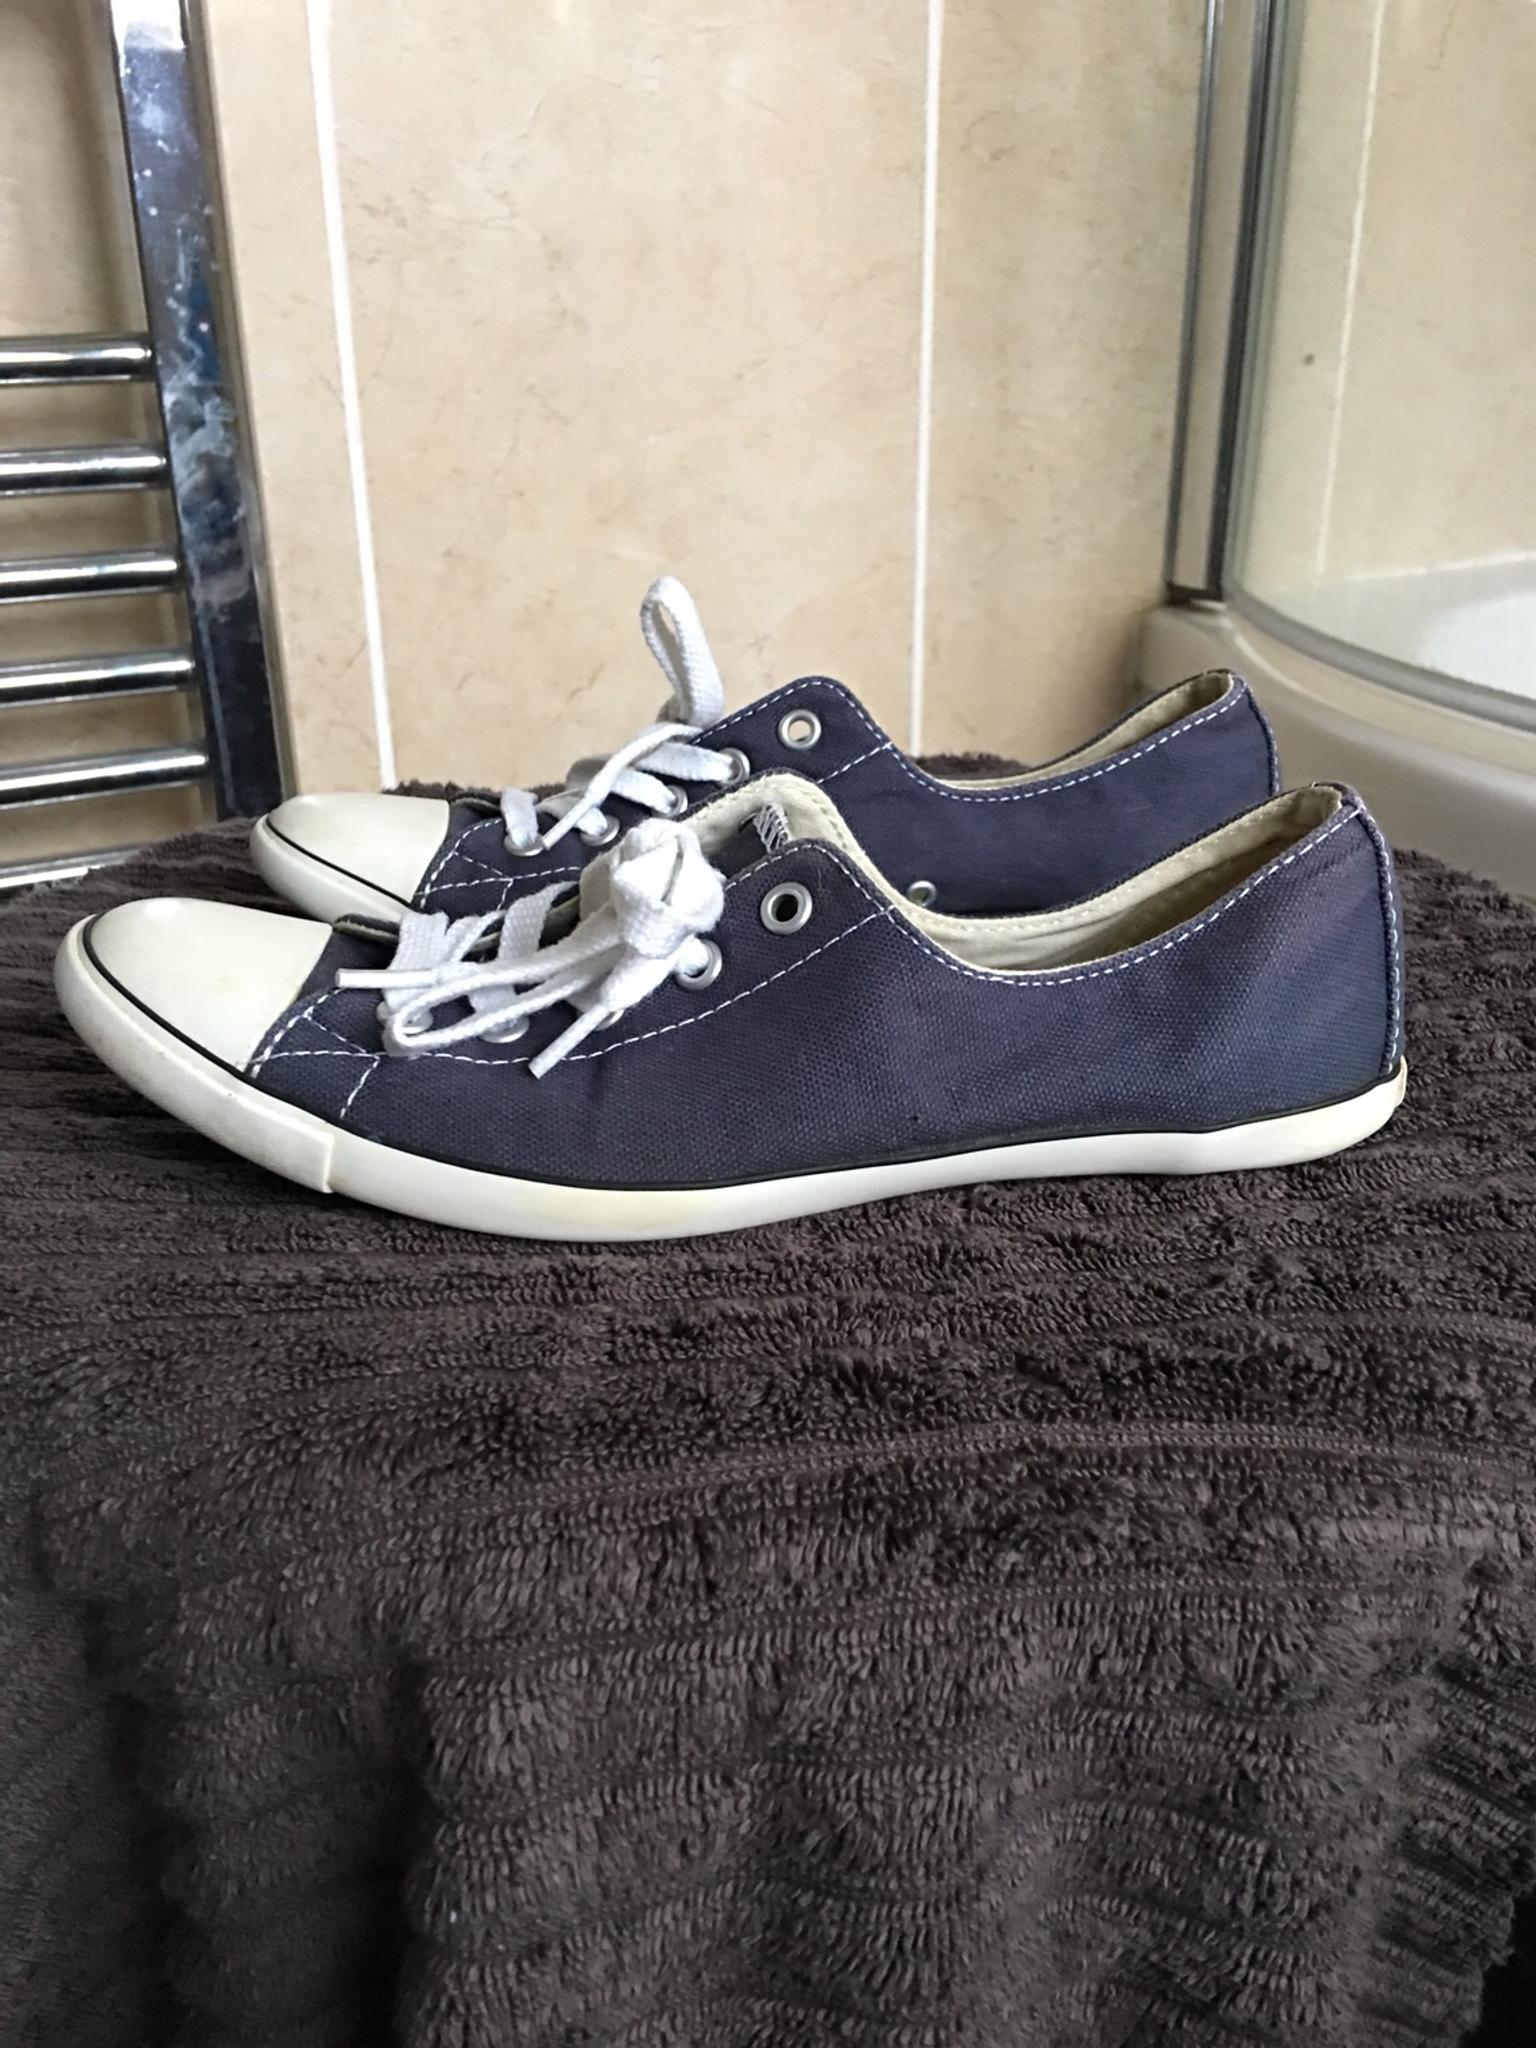 navy converse size 5 womens